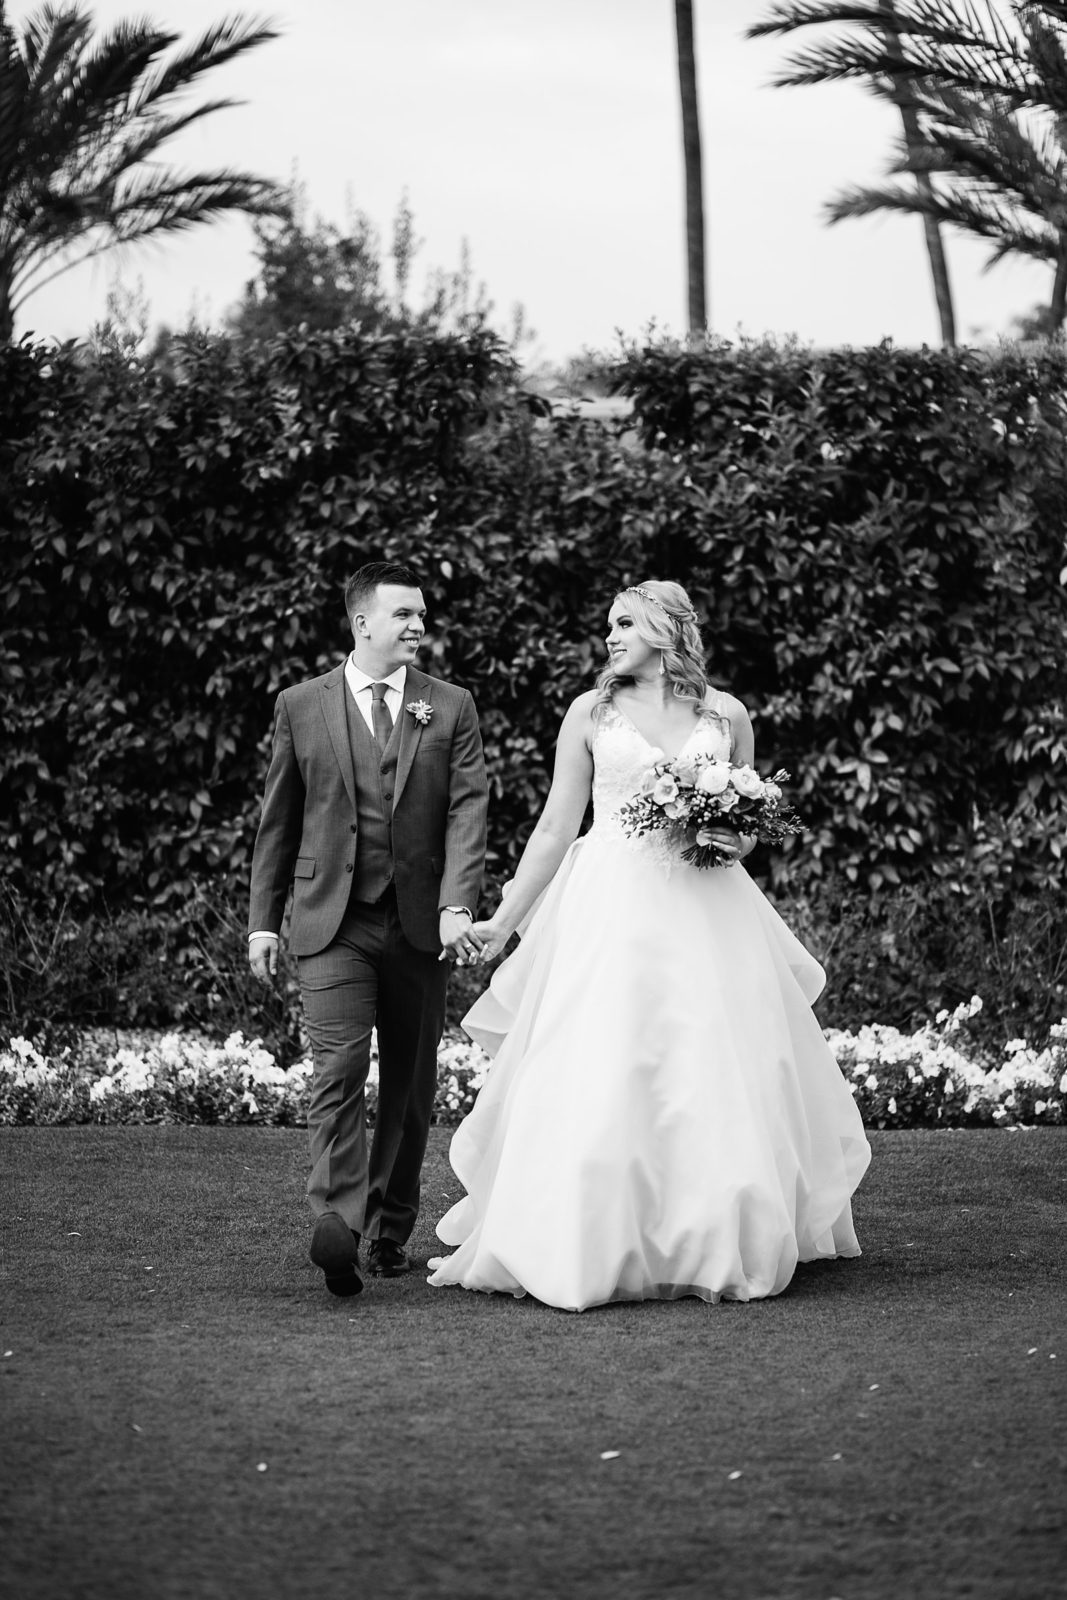 Bride and Groom walking together during their The Scottsdale Resort at McCormick Ranch wedding by Scottsdale wedding photographer PMA Photography.